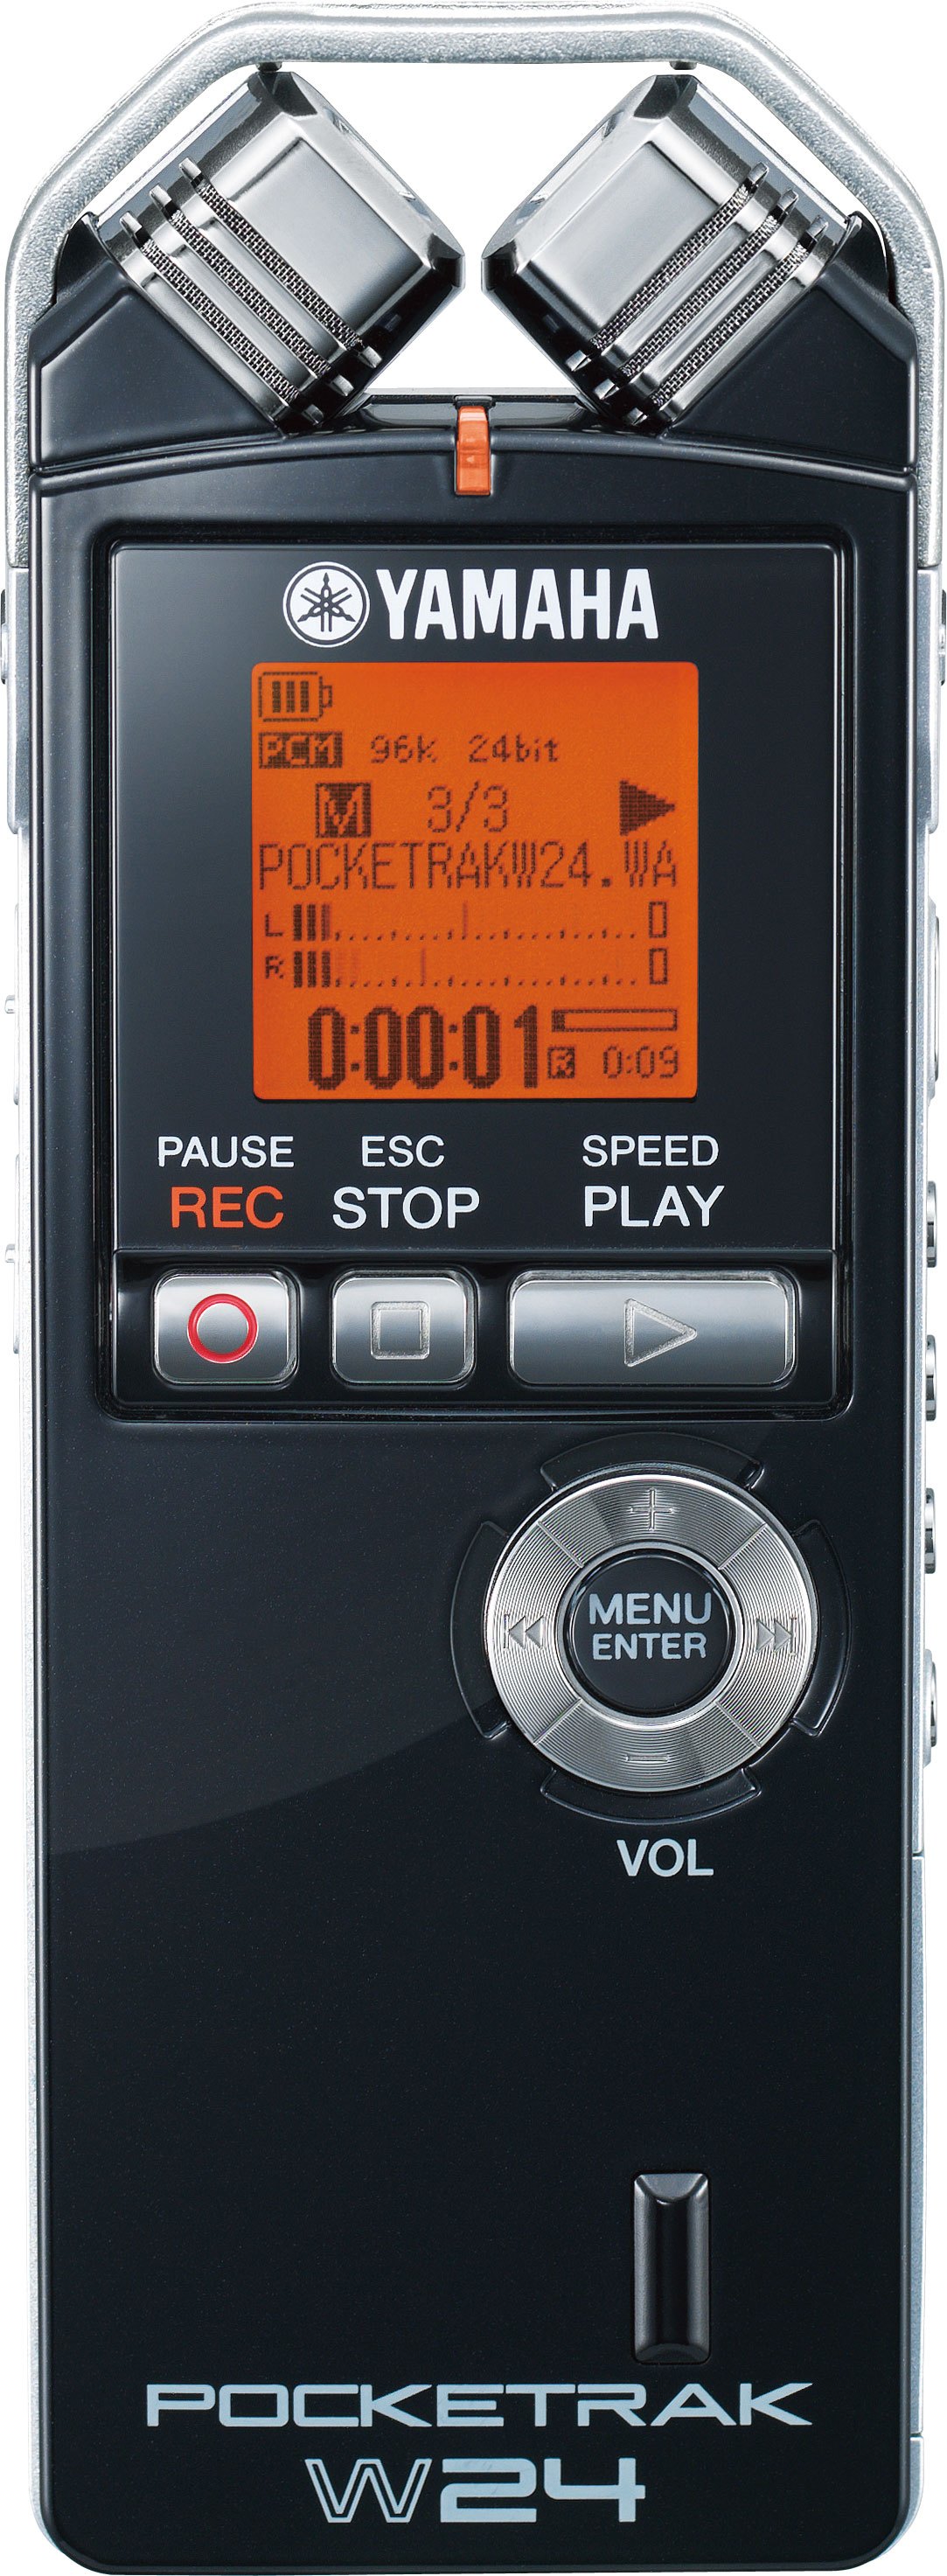 POCKETRAK W24 - Overview - CD Players - Professional Audio 